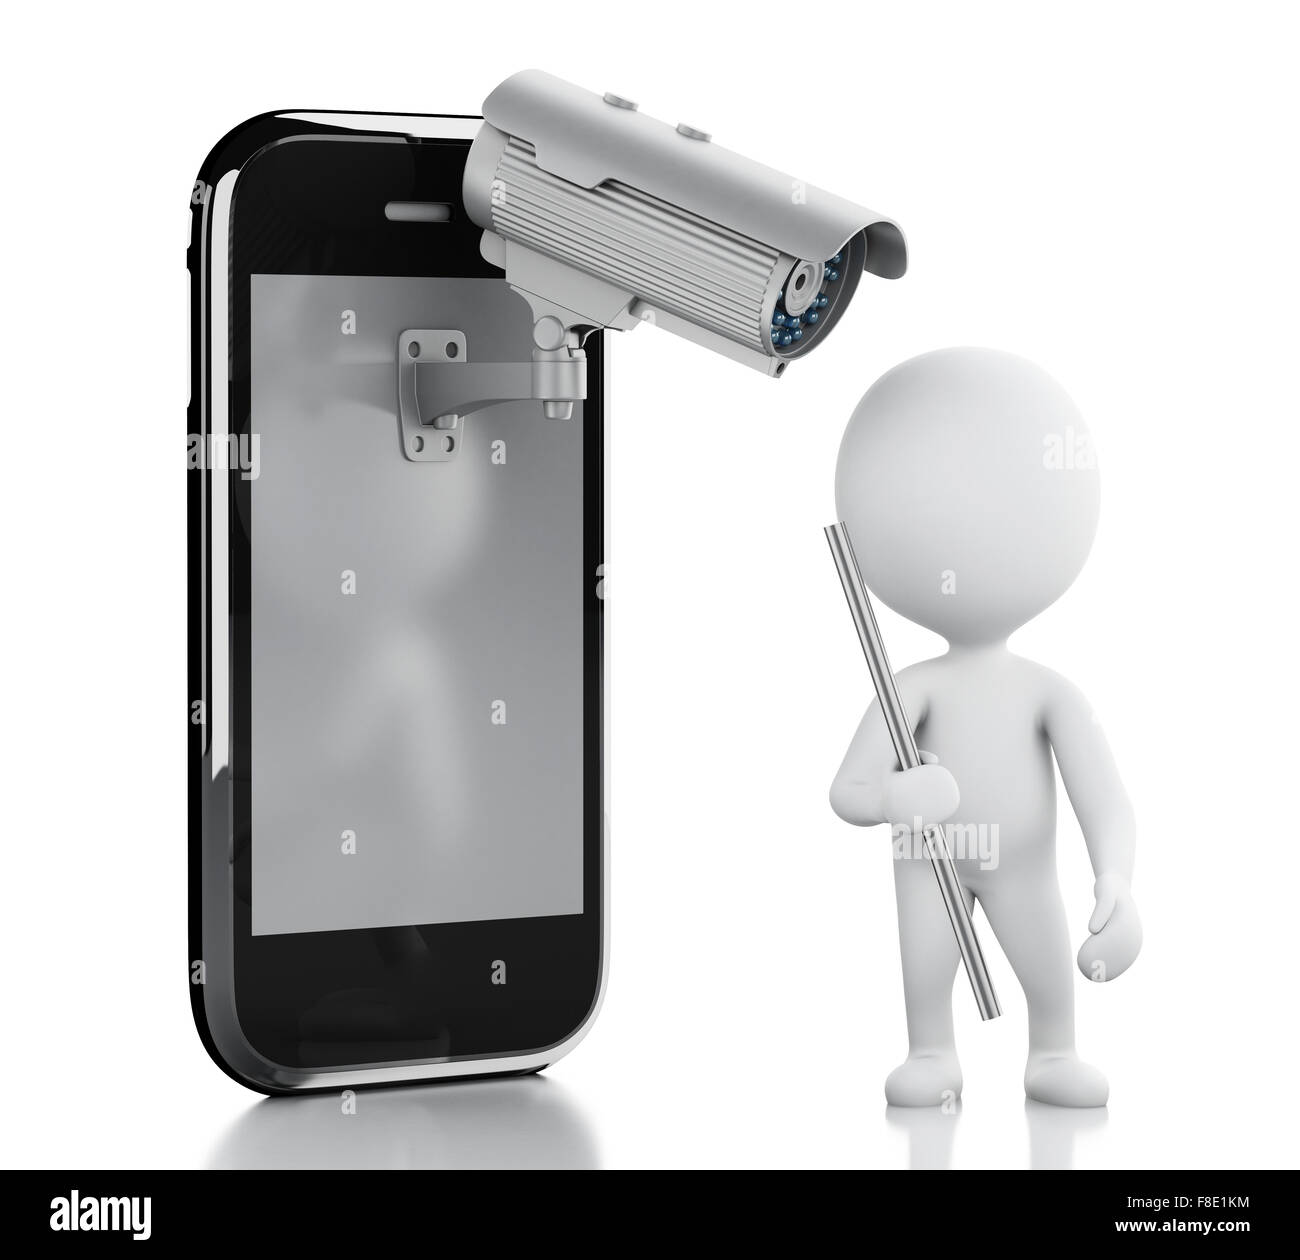 3d image. White people thief. Smartphone with Security CCTV camera. Mobile security concept. Isolated white background Stock Photo